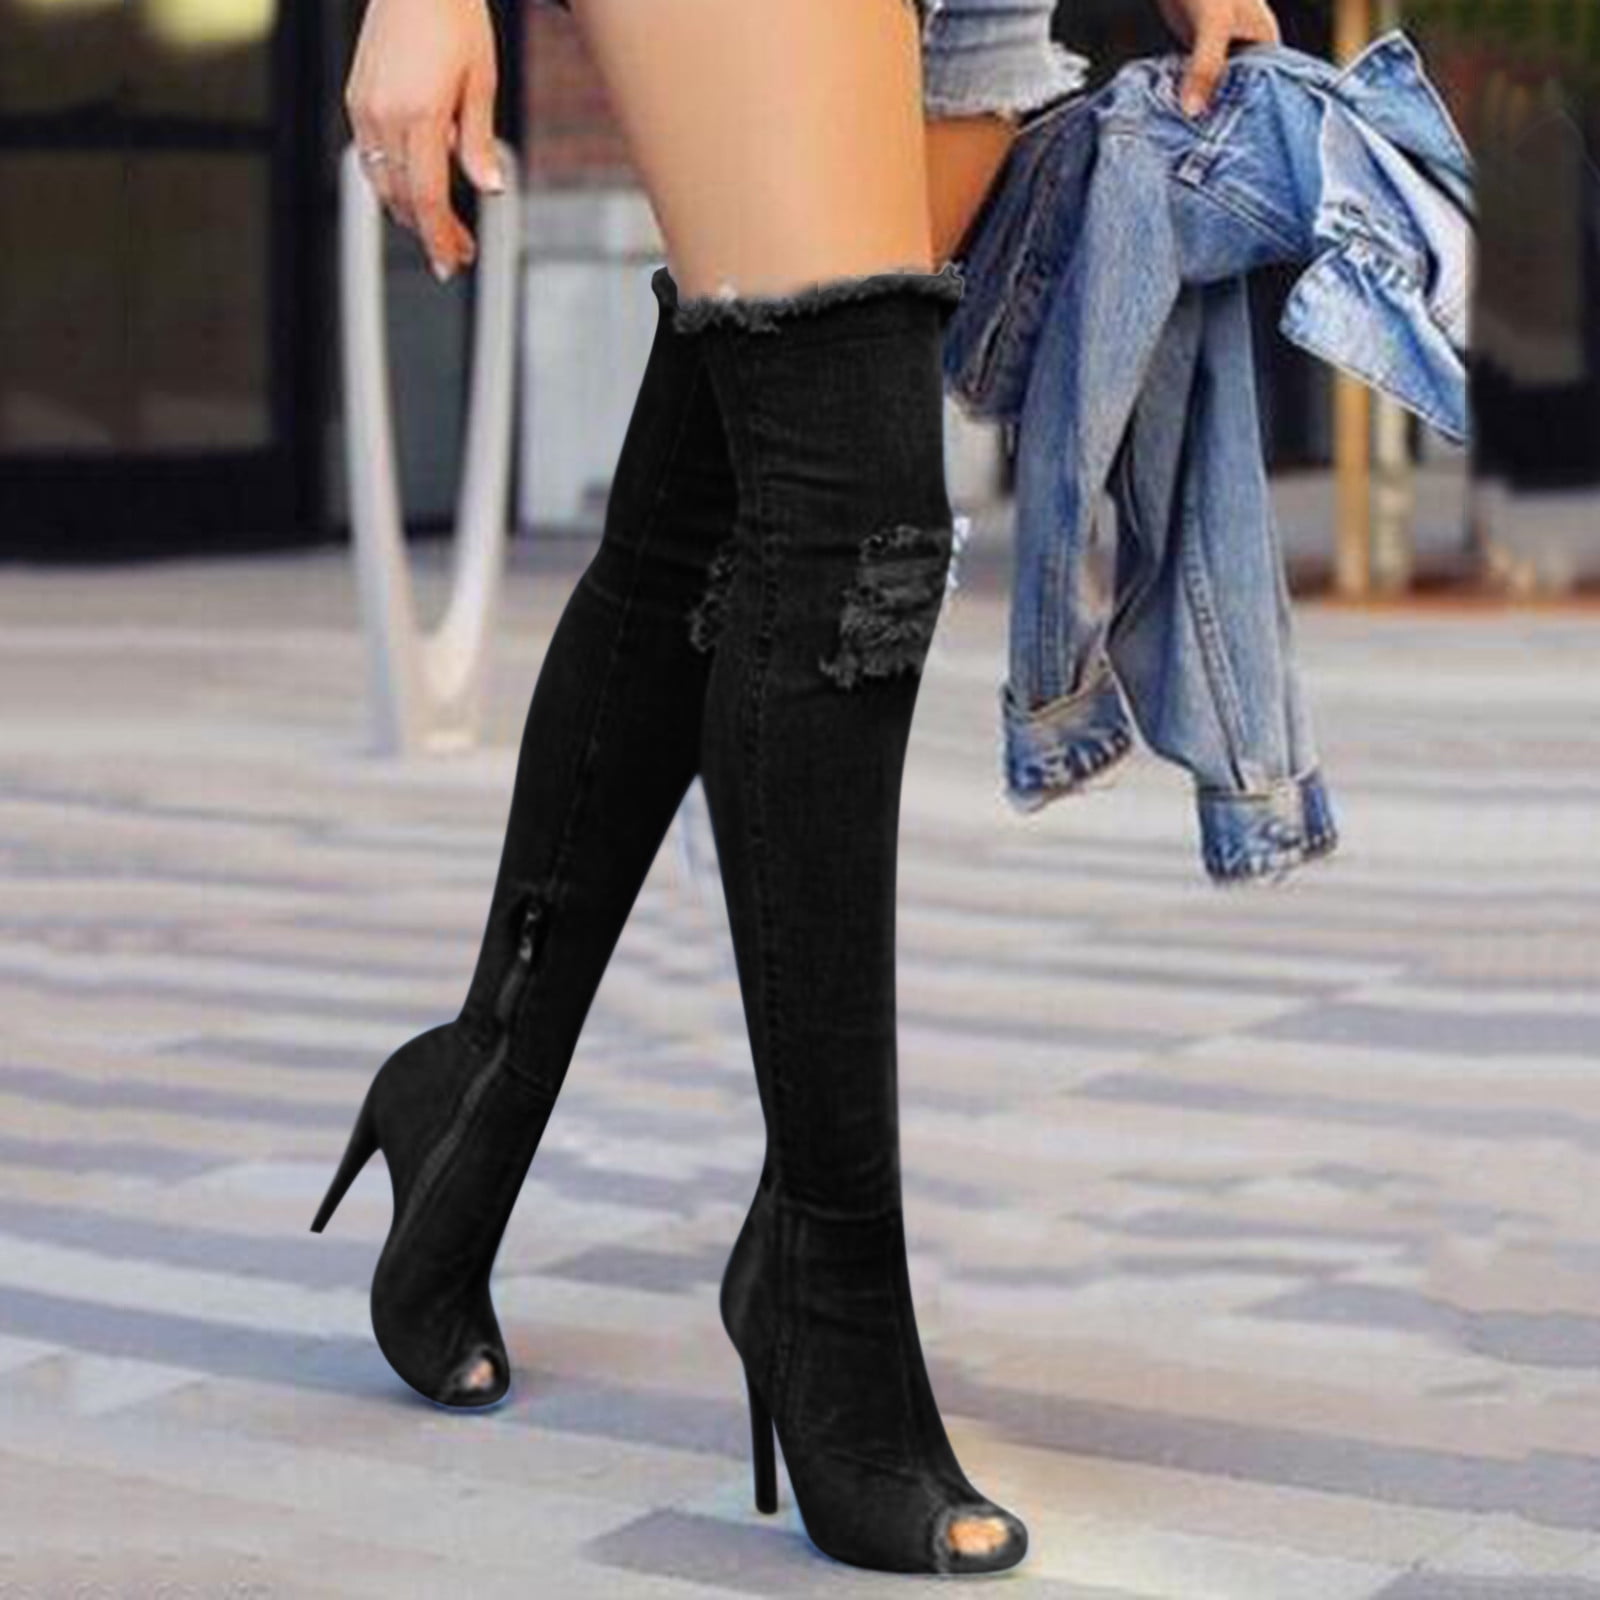 Hot Fashion Women's High Heel Boots Spring And Autumn Open Toe Over The  Knee Tight High Heel Boots Jeans Boots 